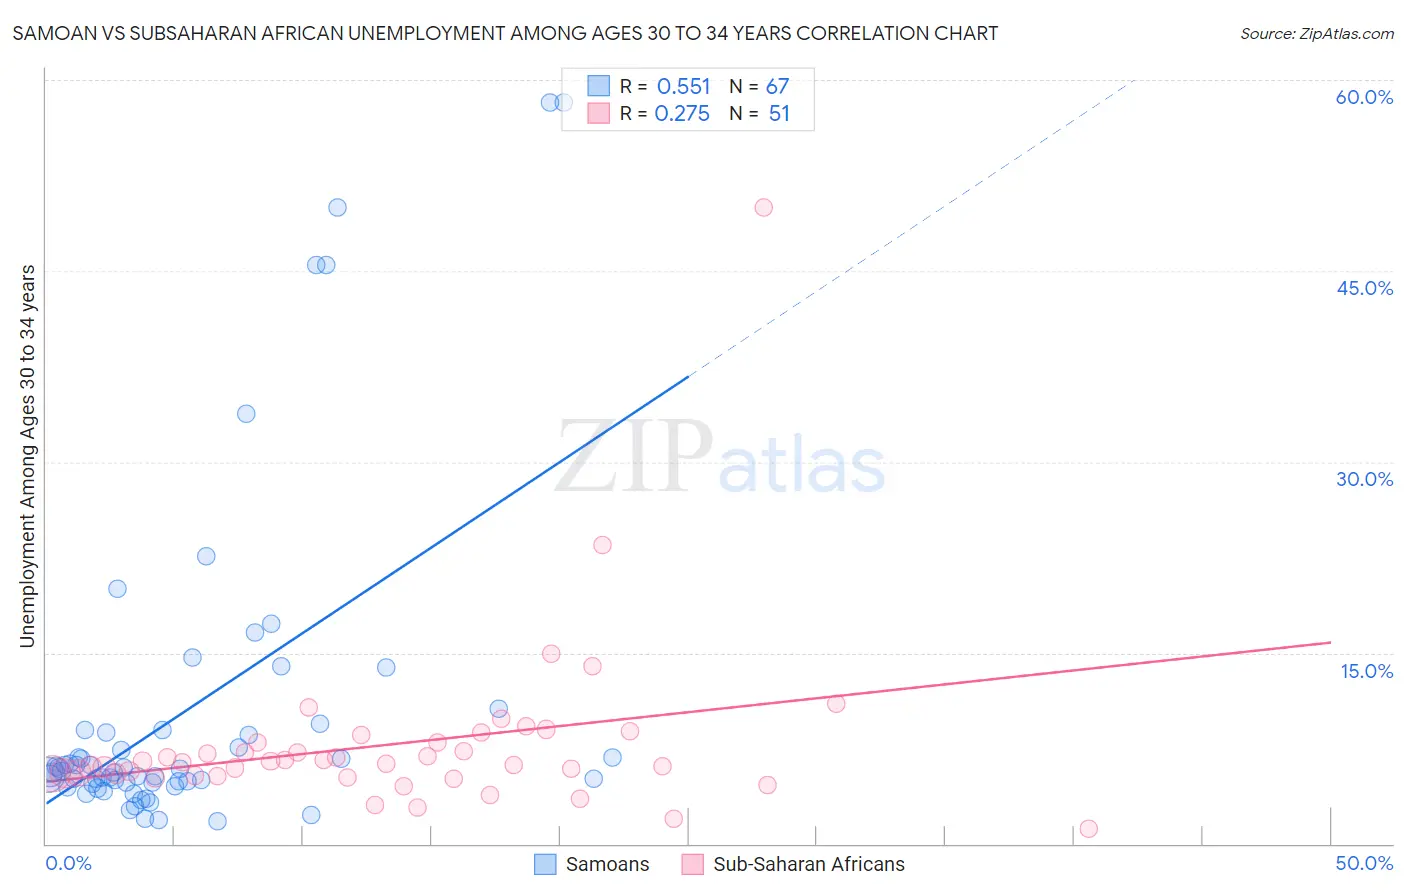 Samoan vs Subsaharan African Unemployment Among Ages 30 to 34 years